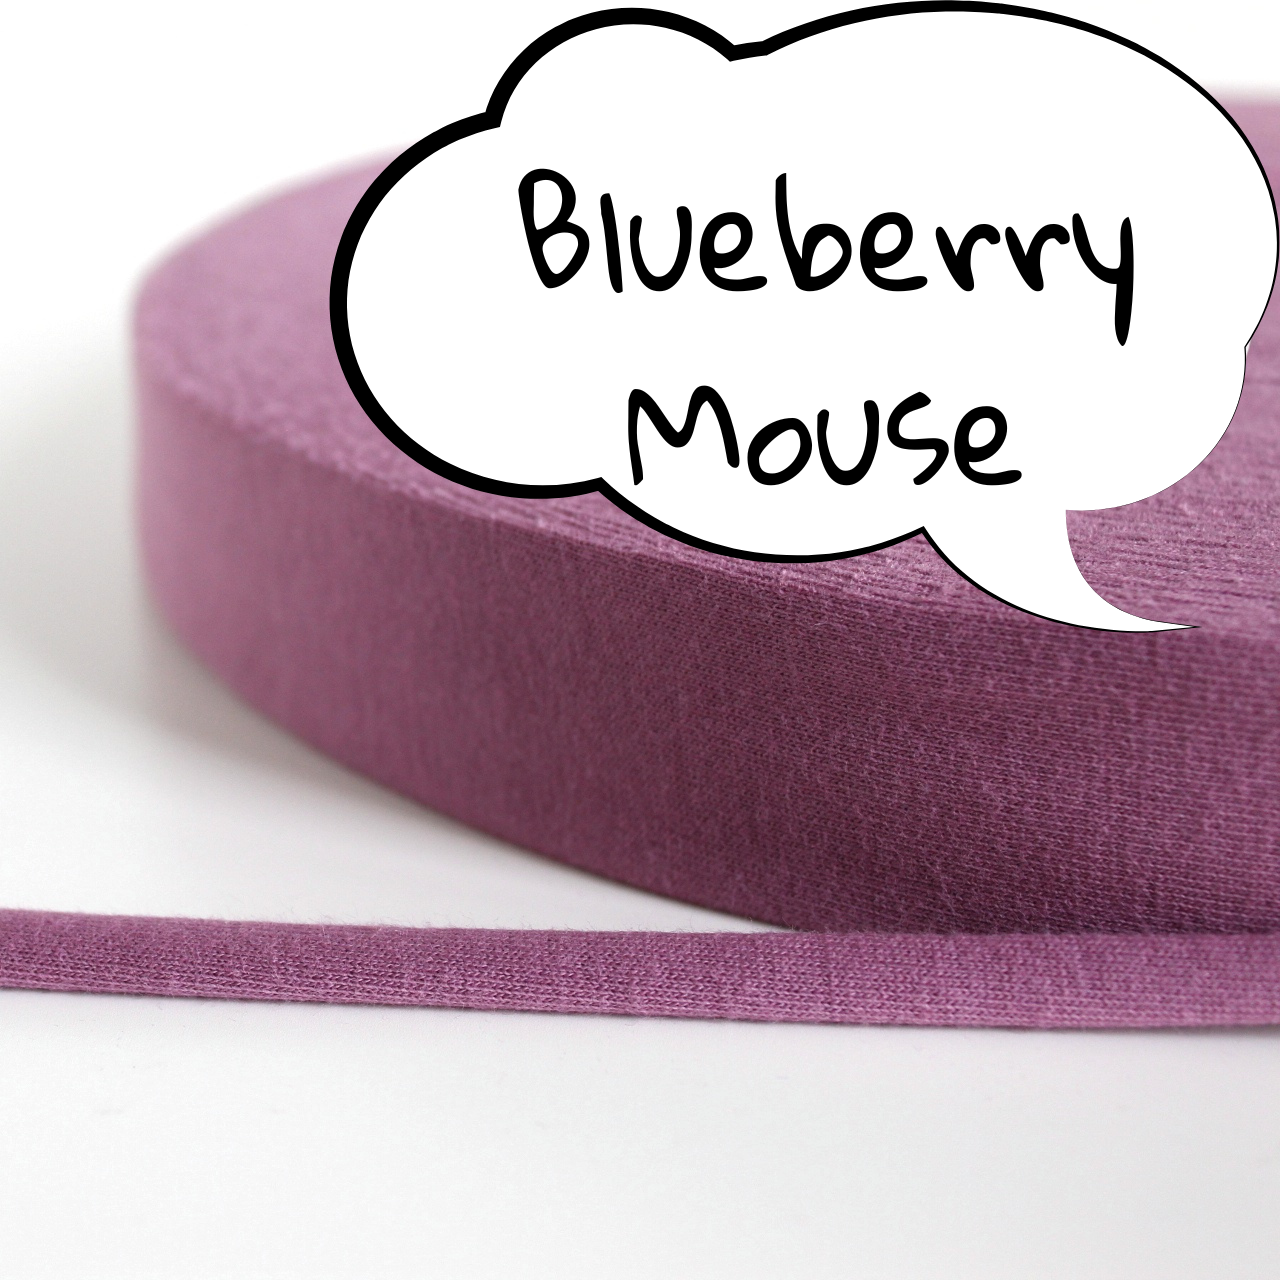 Blueberry mouse